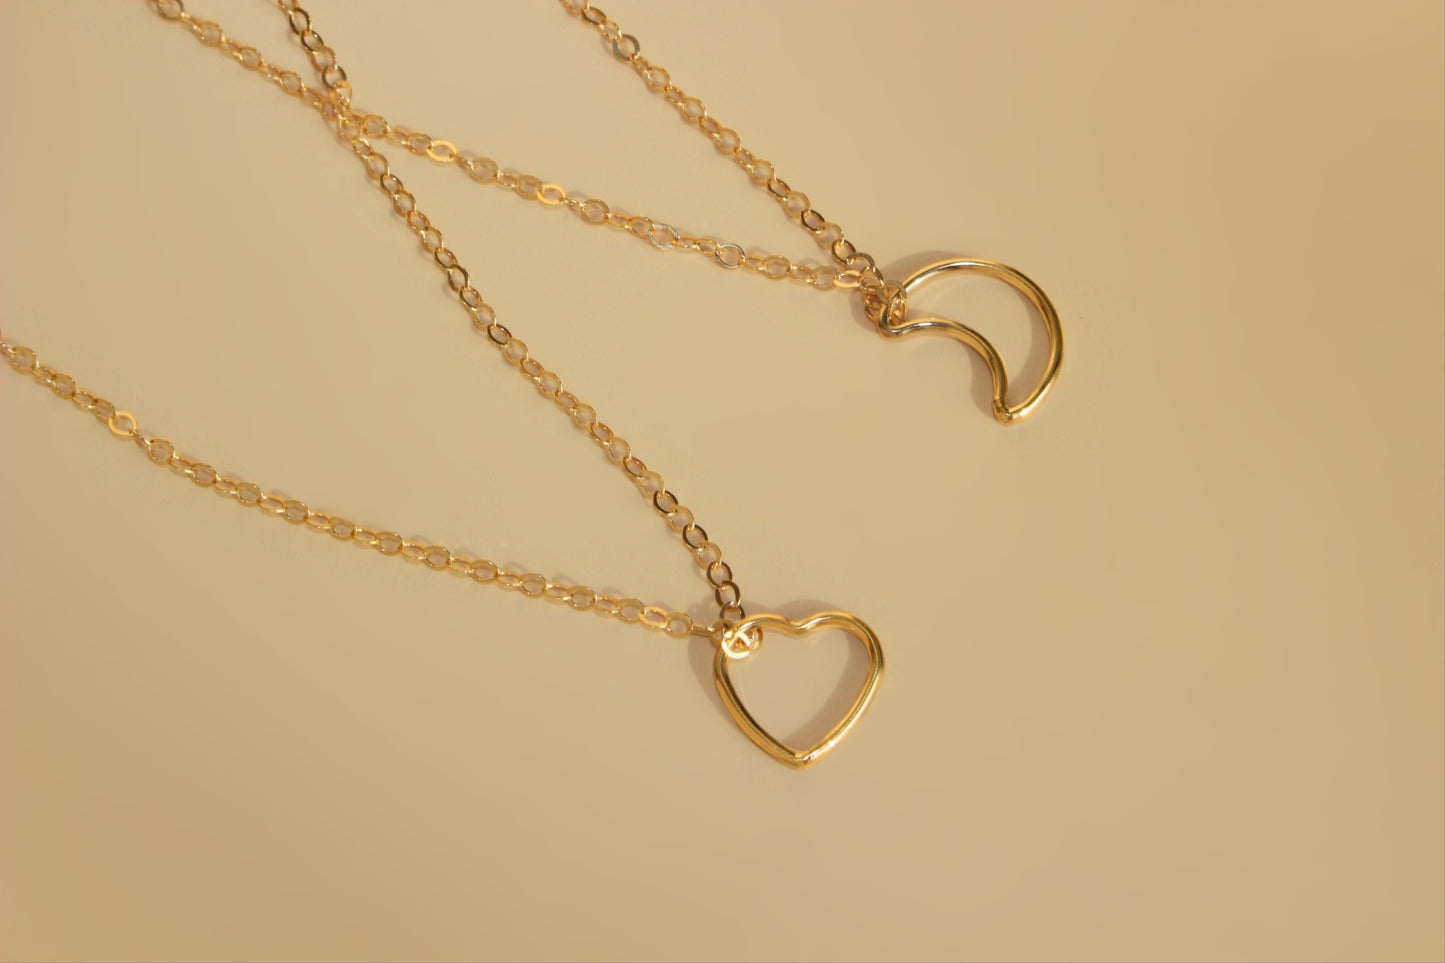 Moon or Heart wire catcher ∙ 14K Gold Filled Necklace ∙ Moon pendant charm necklace